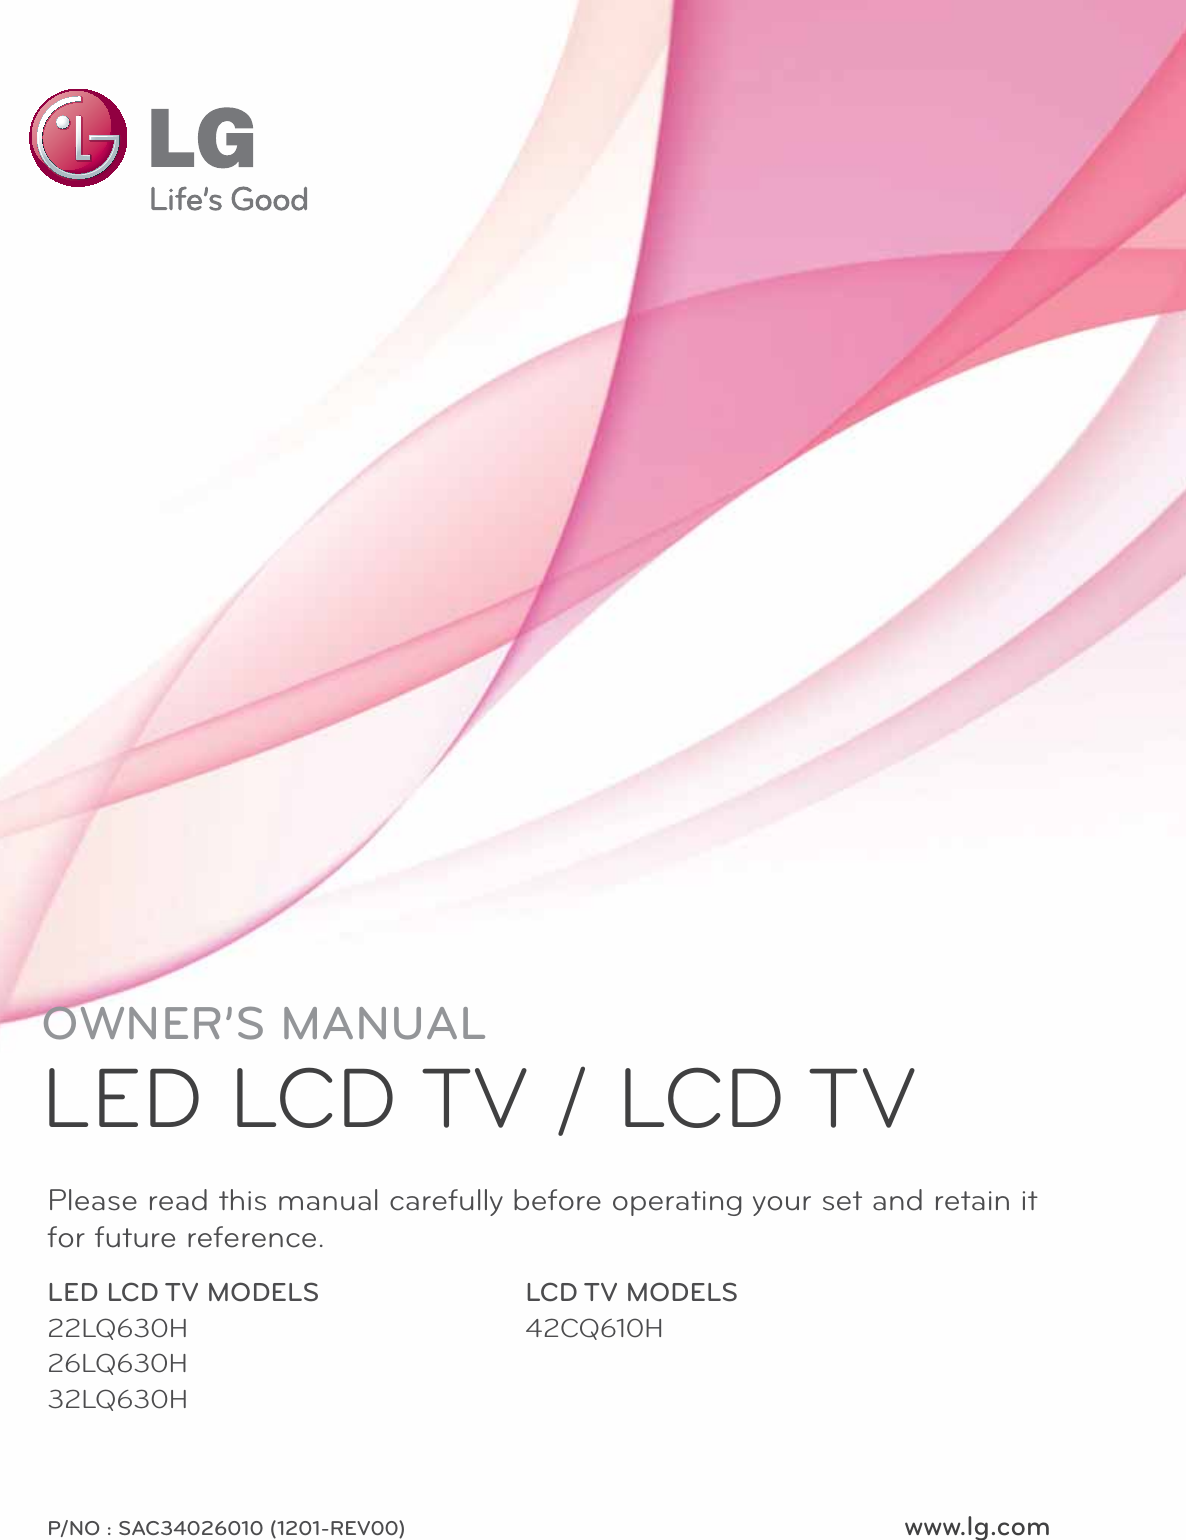 www.lg.comPlease read this manual carefully before operating your set and retain it for future reference.22LQ630H26LQ630H32LQ630HP/NO : SAC34026010 (1201-REV00)42CQ610HOWNER’S MANUALLED LCD TV / LCD TVLED LCD TV MODELS LCD TV MODELS